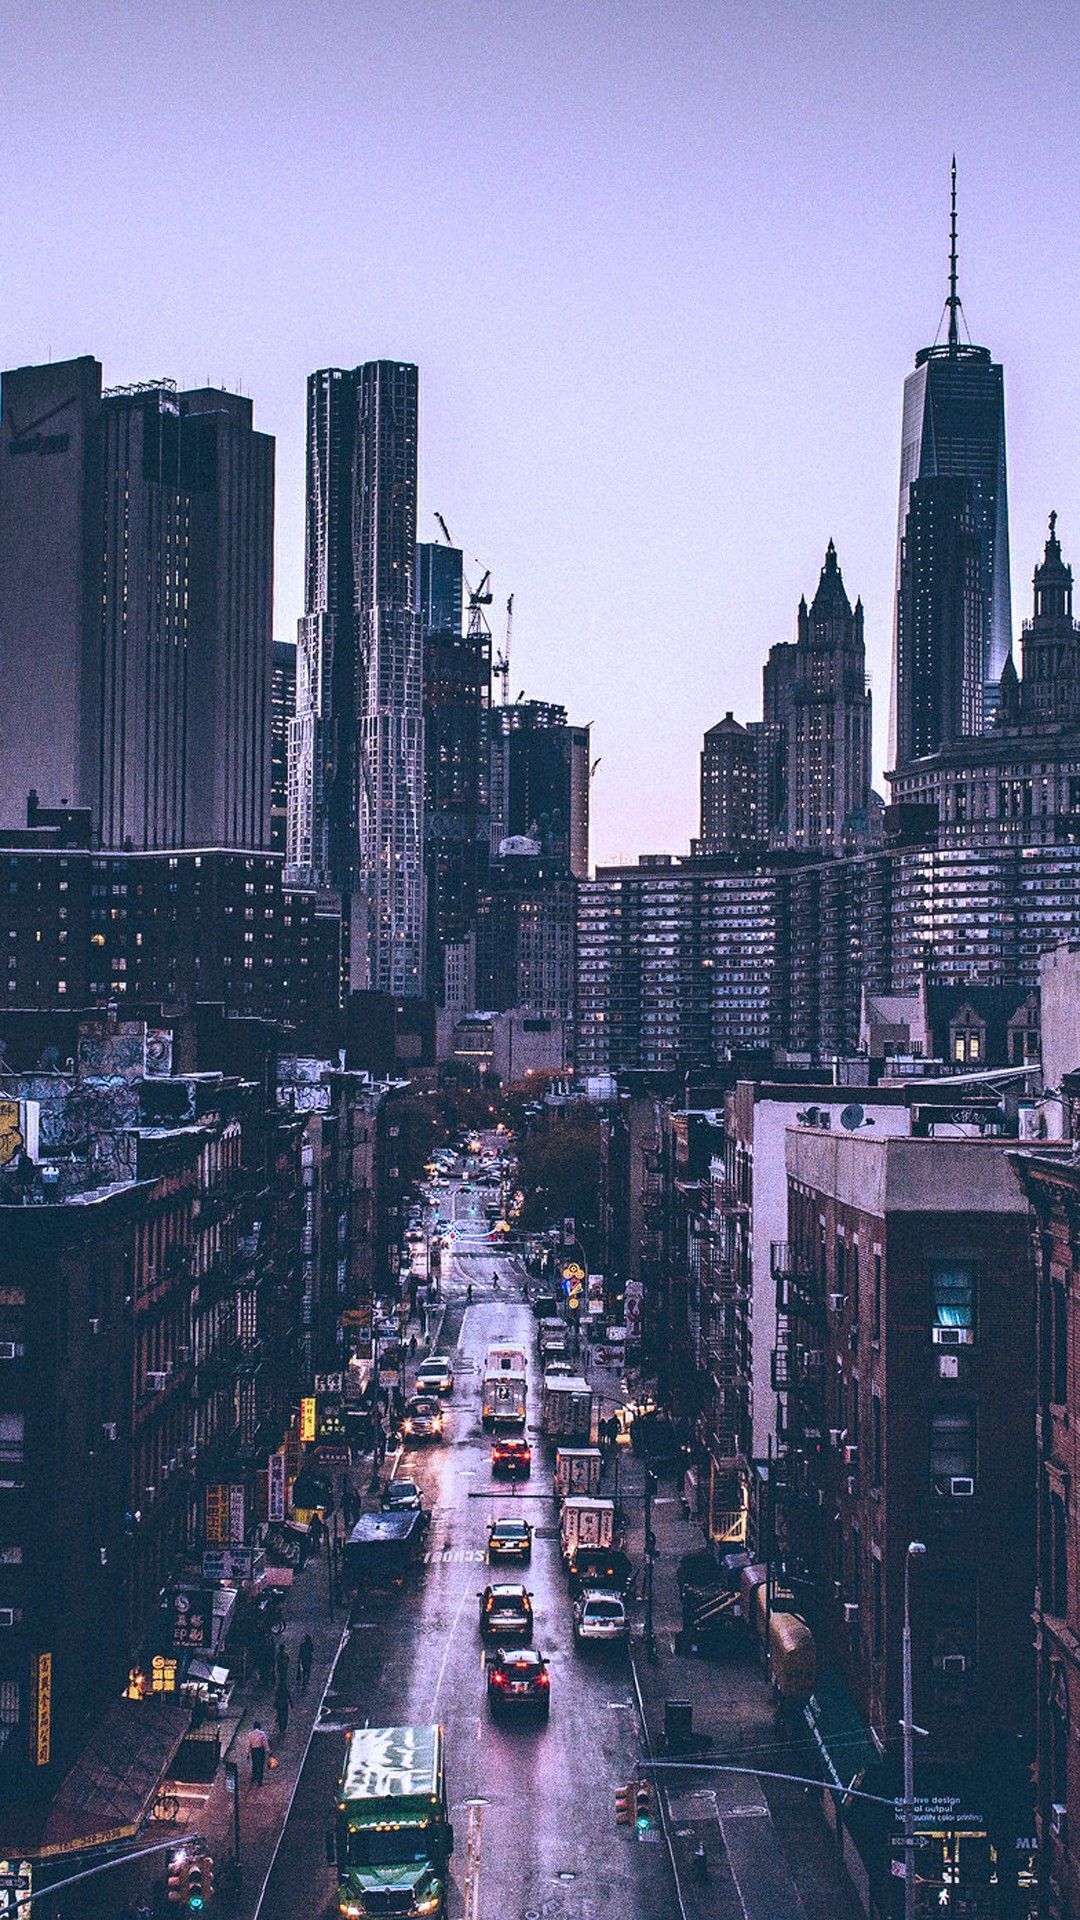 A street in New York City at dusk with tall buildings - City, skyline, cityscape